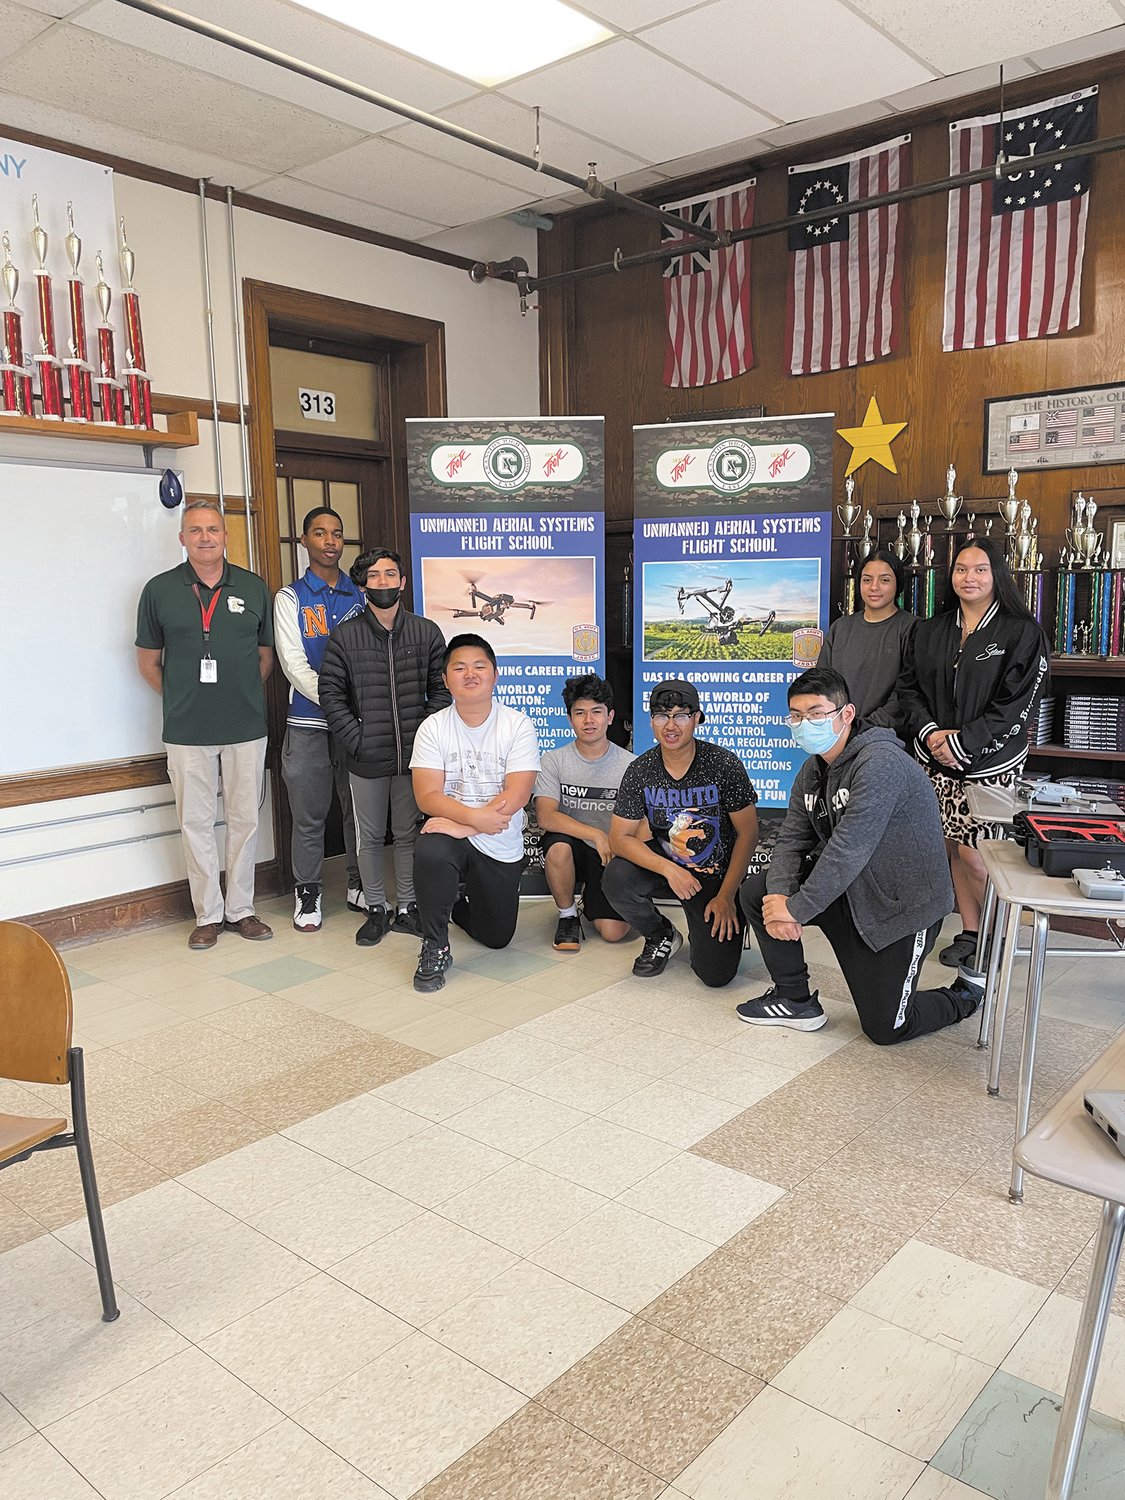 FLYING HIGH WITH THEIR DRONE LICENSES: Some of the cadets who completed the Unmanned Aerial Flight School include Alexis Franco, Cristy Juarev, Adrian Roslales, Buntha Chur, Danny Song, Jefferson Shi, Jonathan Quiroa, Ray Melendez Montera, along with instructor Moise Moniz Sgt. Major (ret) U.S. Army.